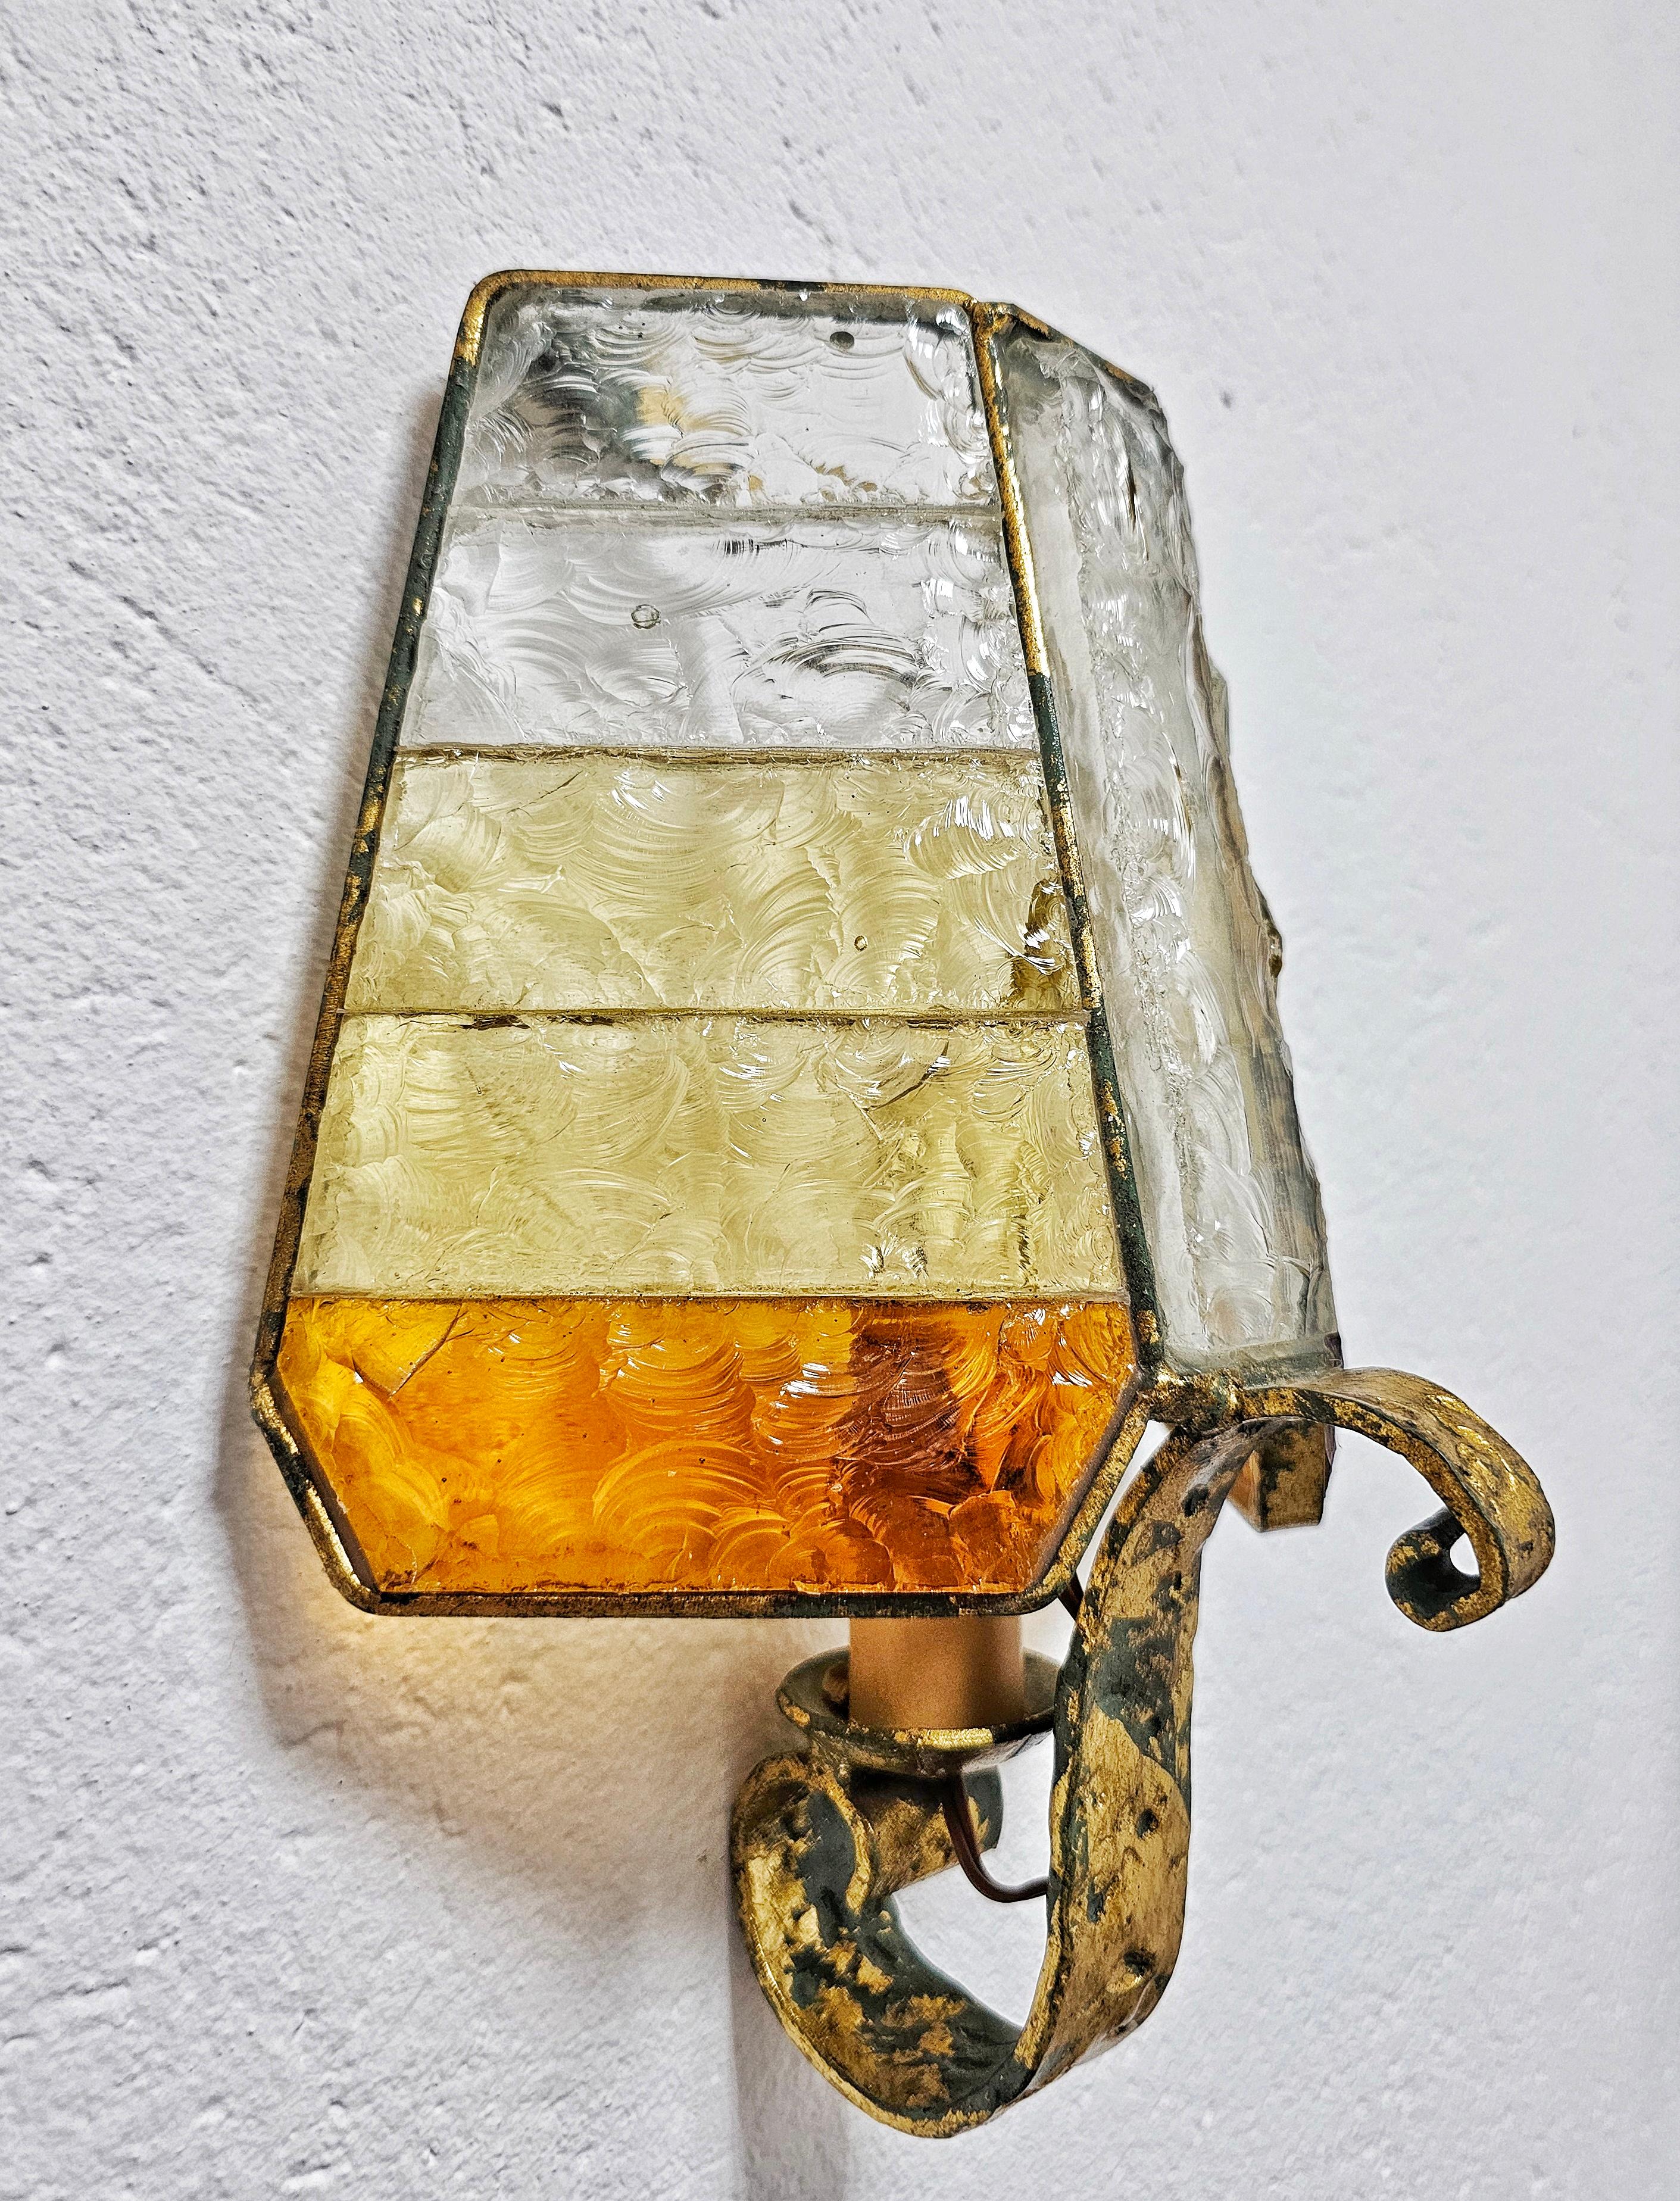 Pair of Brutalist Sconces in hammered glass by Longobard, Italy 1970s For Sale 2